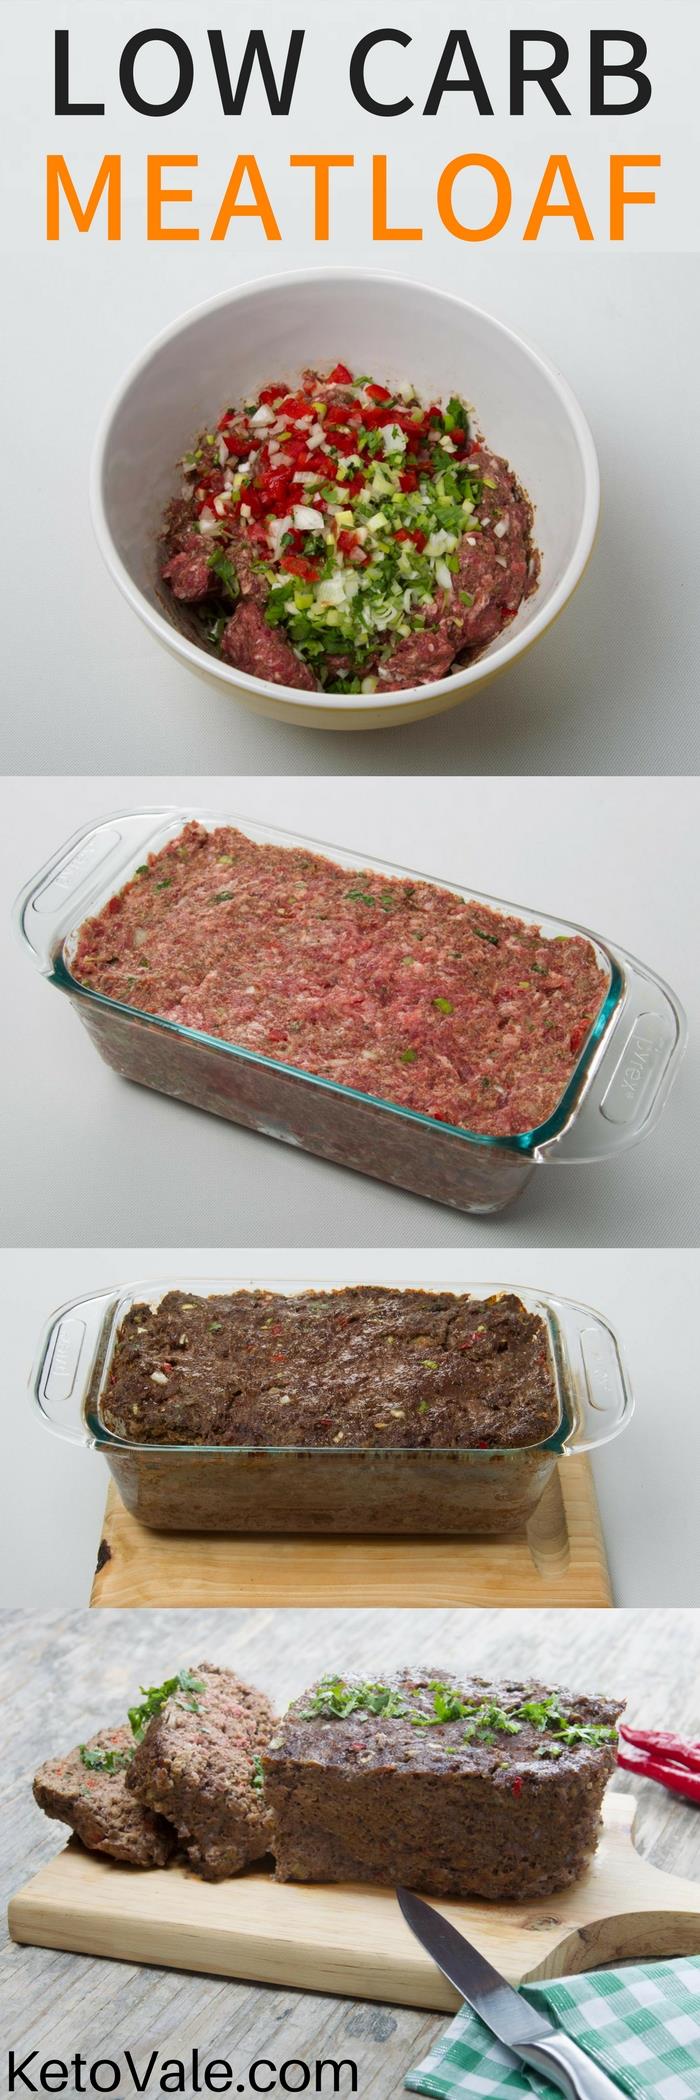 Easy Beef Meatloaf Low Carb Recipe | Keto Vale